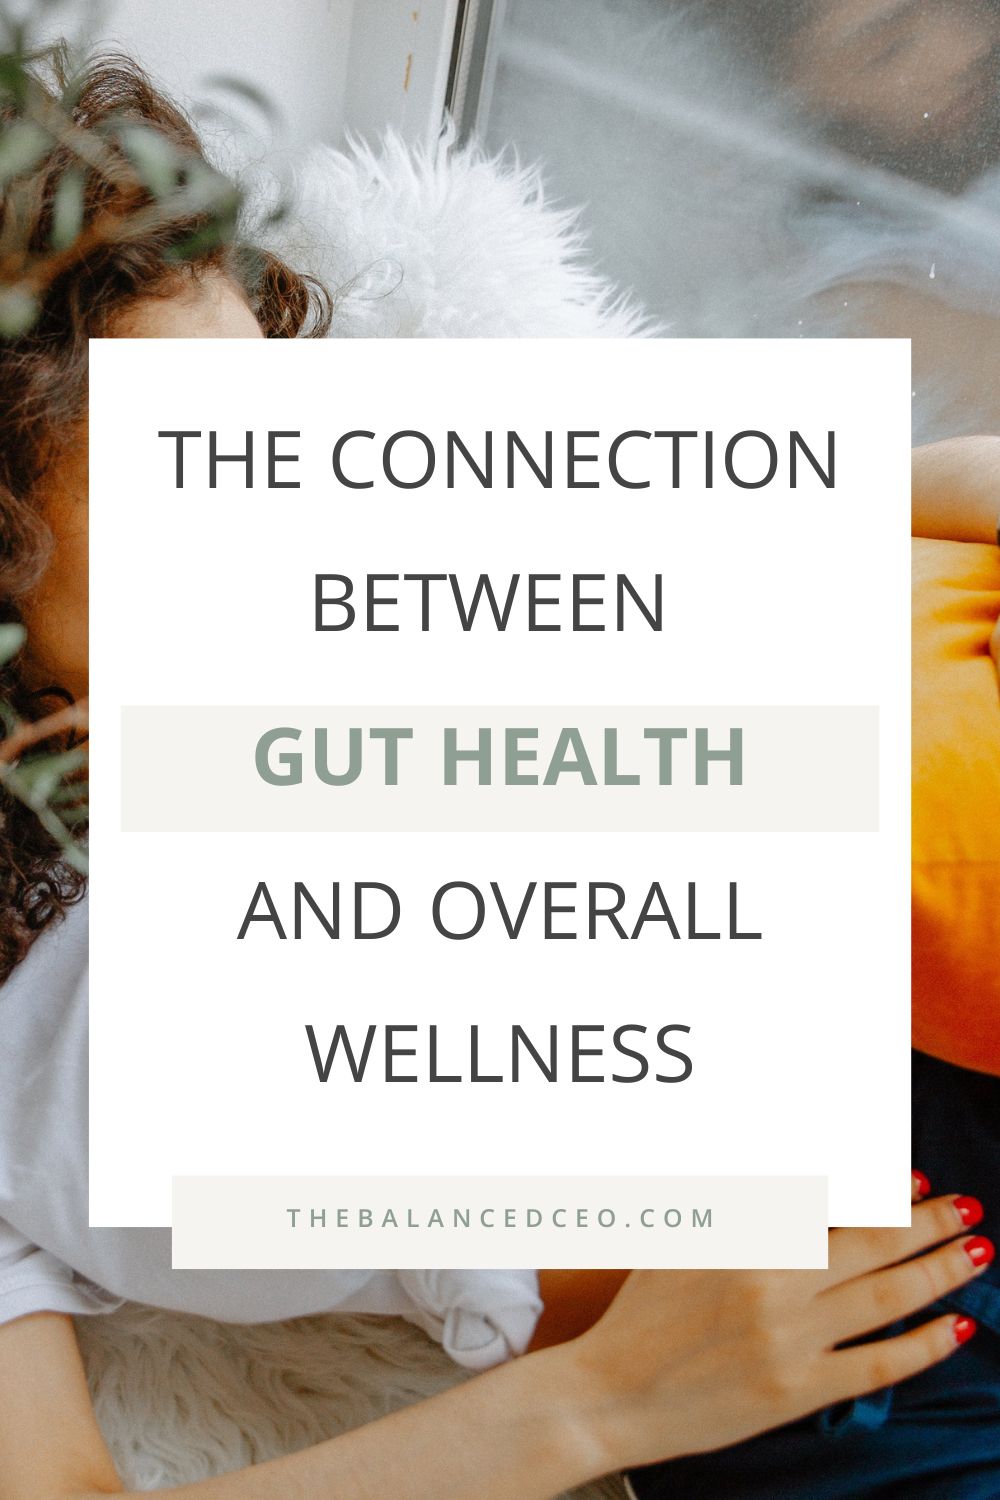 The Connection Between Gut Health and Overall Wellness